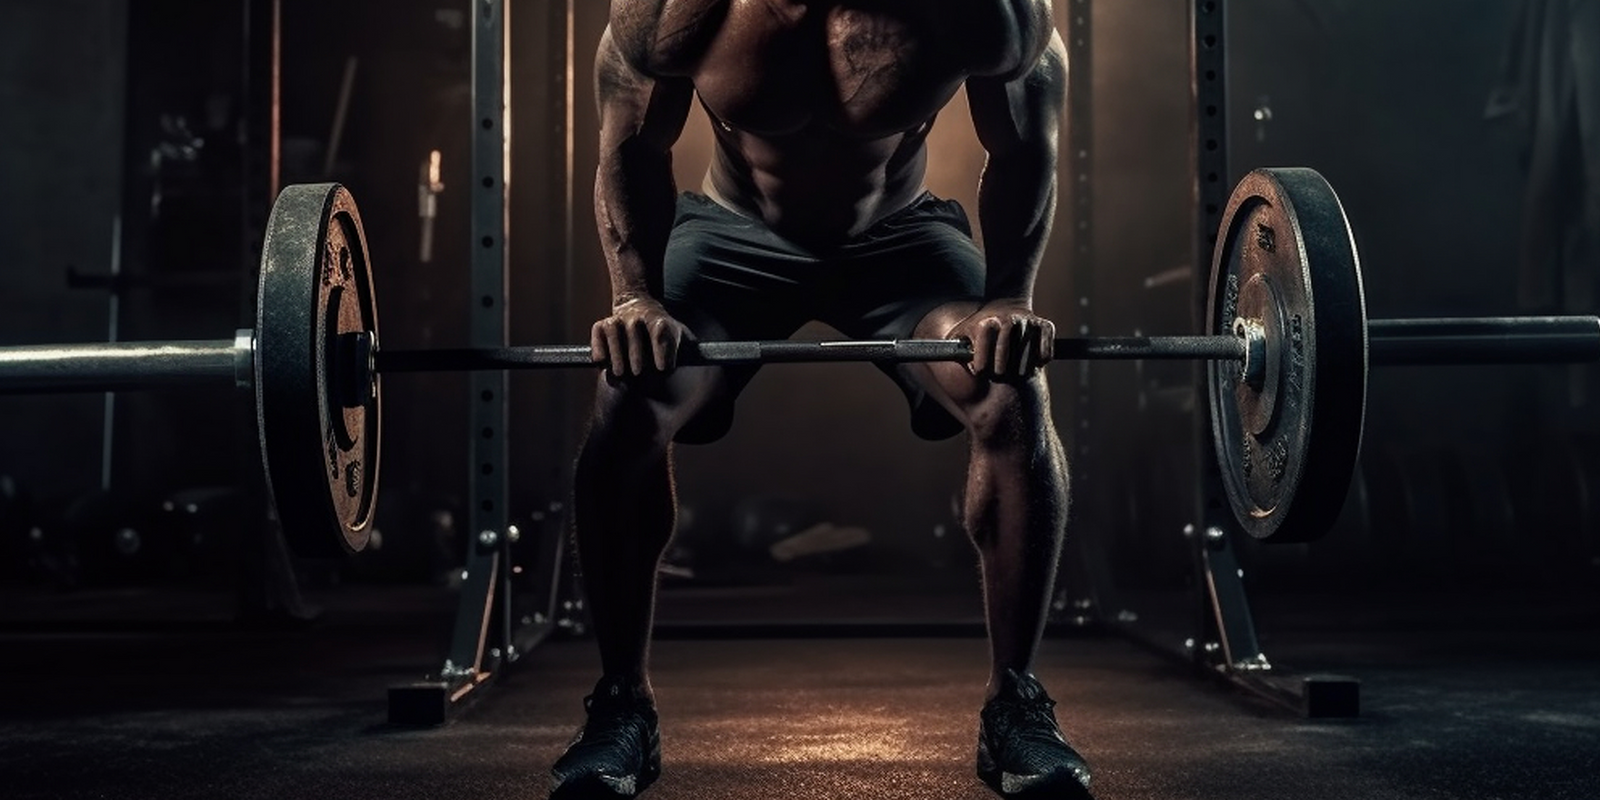 Exercises that help build muscle